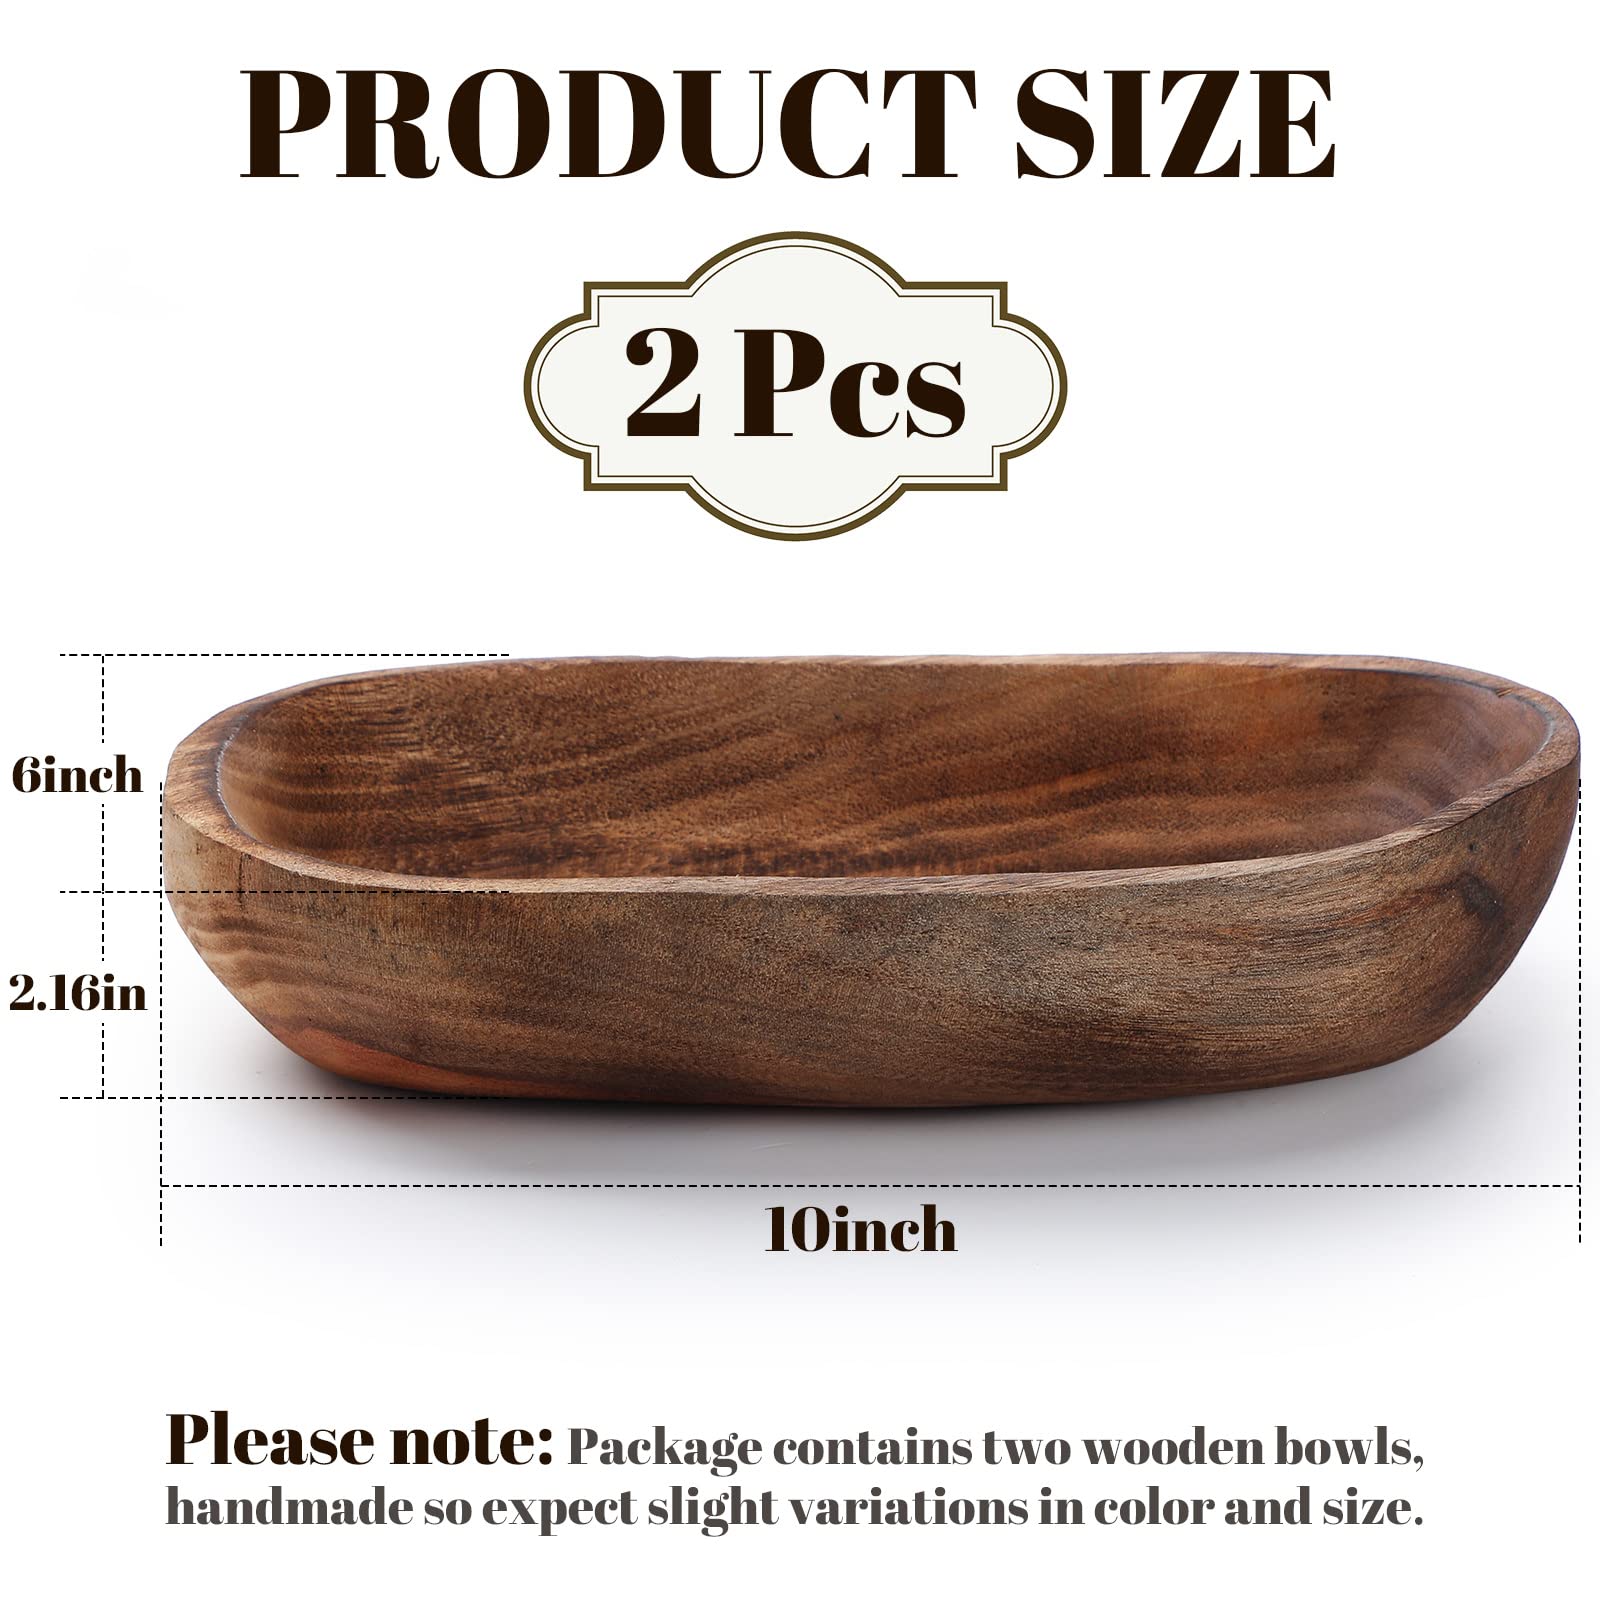 2 Pcs Wooden Dough Bowls for Decor 10 Inch Decorative Bowl Home Decor Oblong Fruit Bowl for Kitchen Counter Rustic Carved Wood Serving Bowl Long Wooden Bread Tray for Dining Room Table Centerpiece